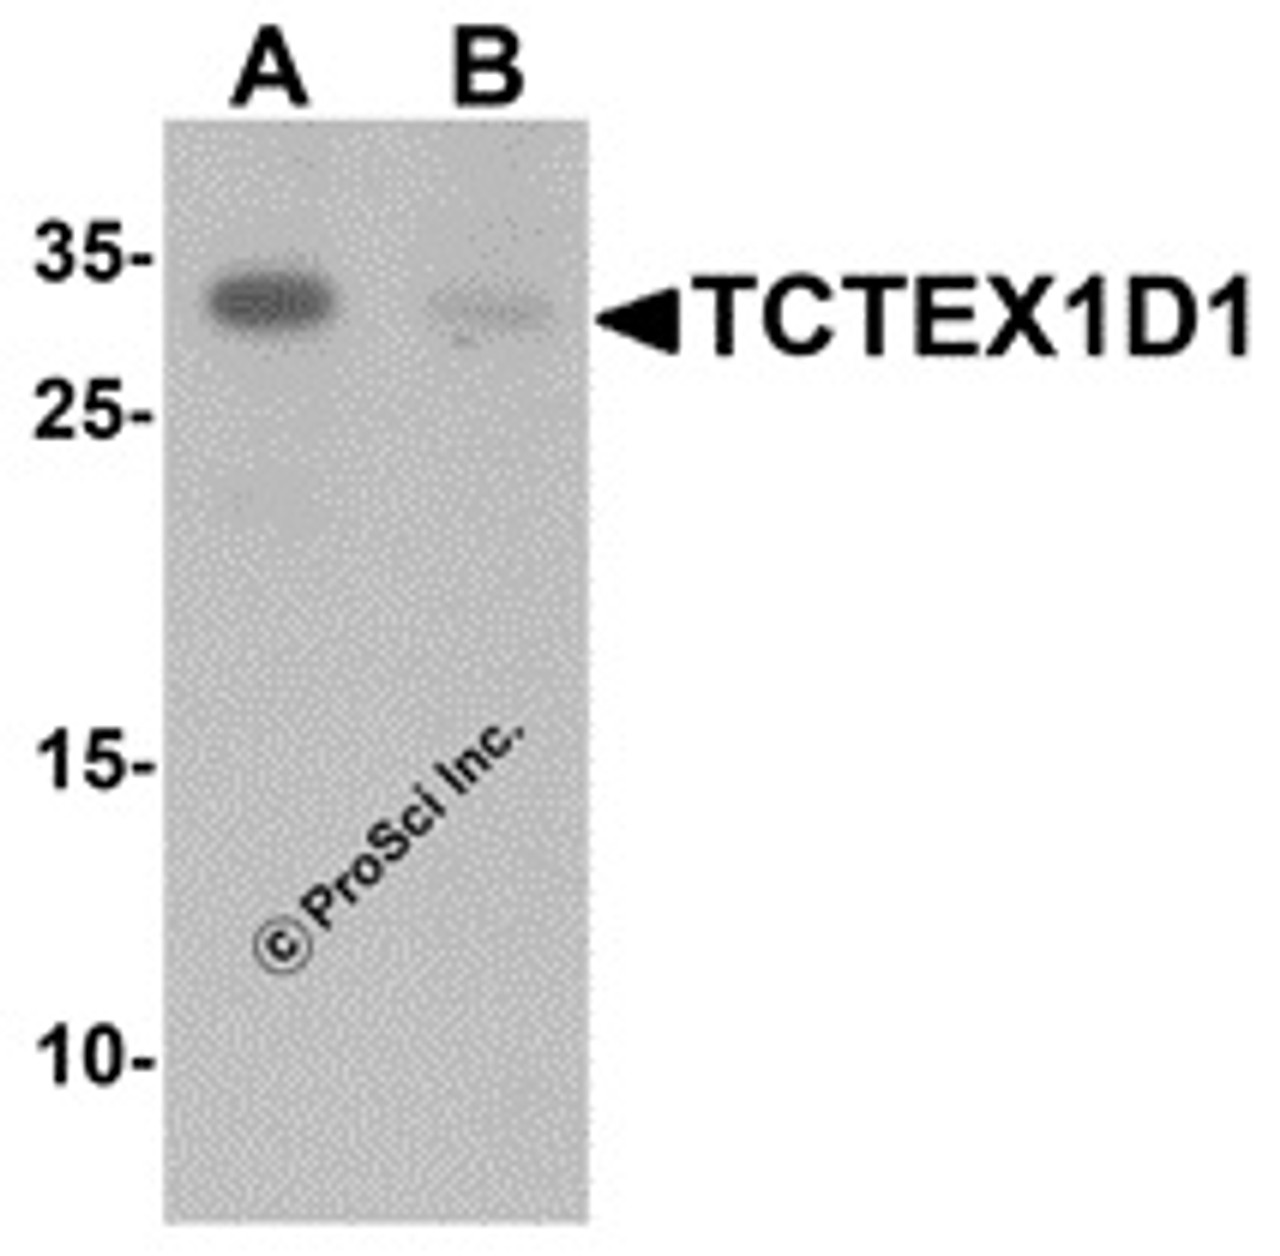 Western blot analysis of TCTEX1D1 in K562 cell lysate with TCTEX1D1 antibody at 1 &#956;g/mL in (A) the absence and (B) the presence of blocking peptide.